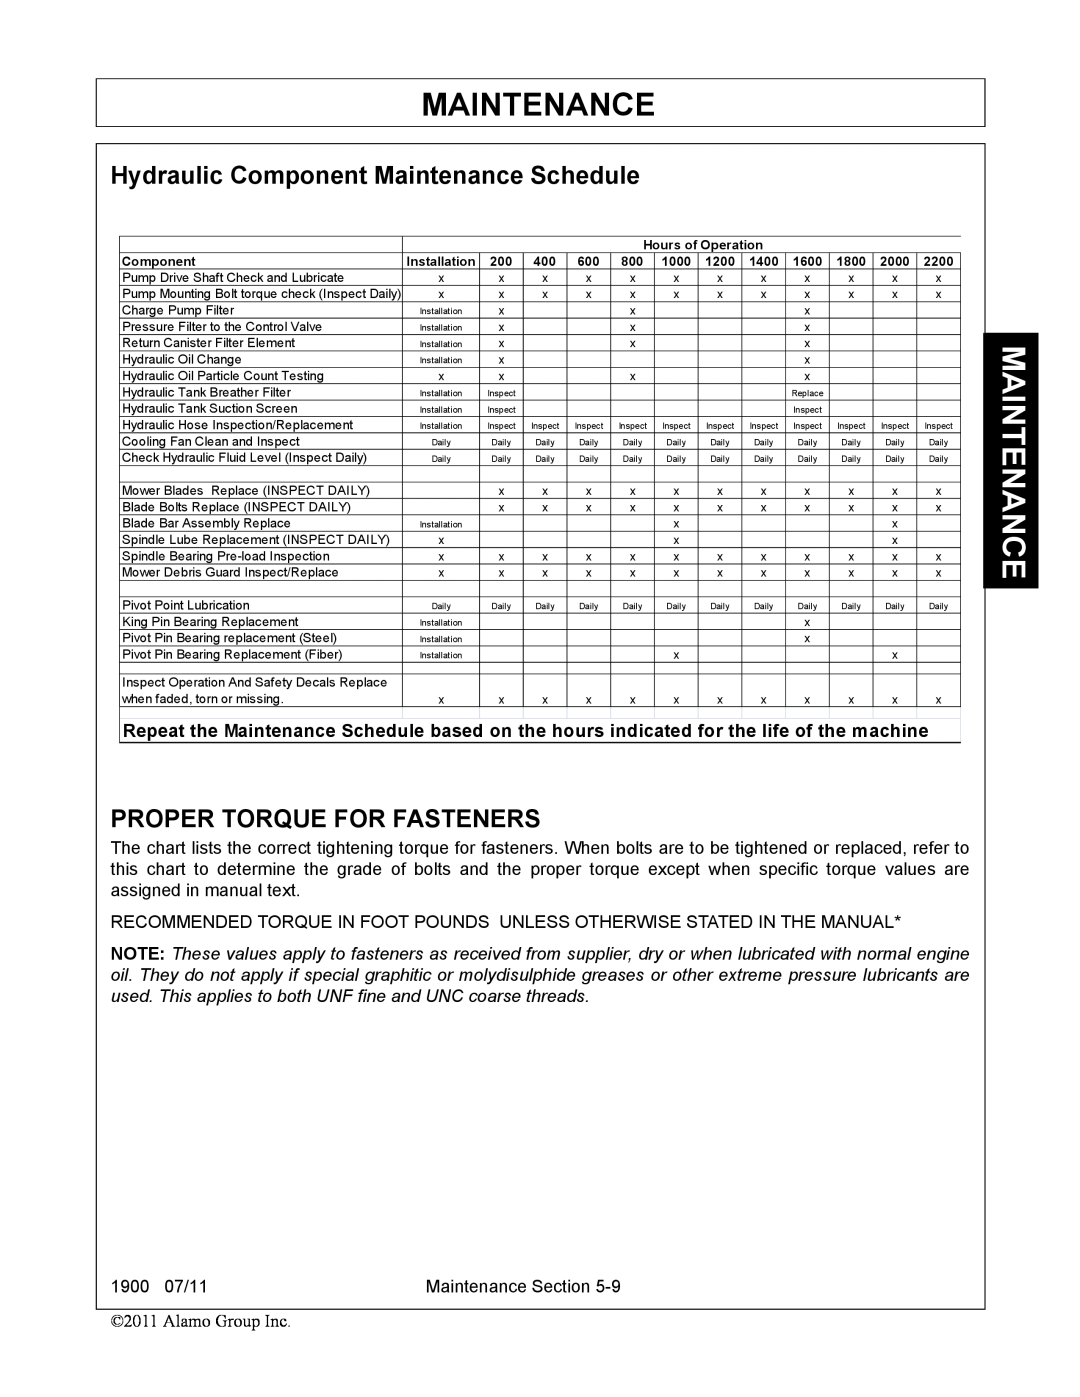 Alamo manual Hydraulic Component Maintenance Schedule, Proper Torque For Fasteners, 1900 07/11, Maintenance Section 